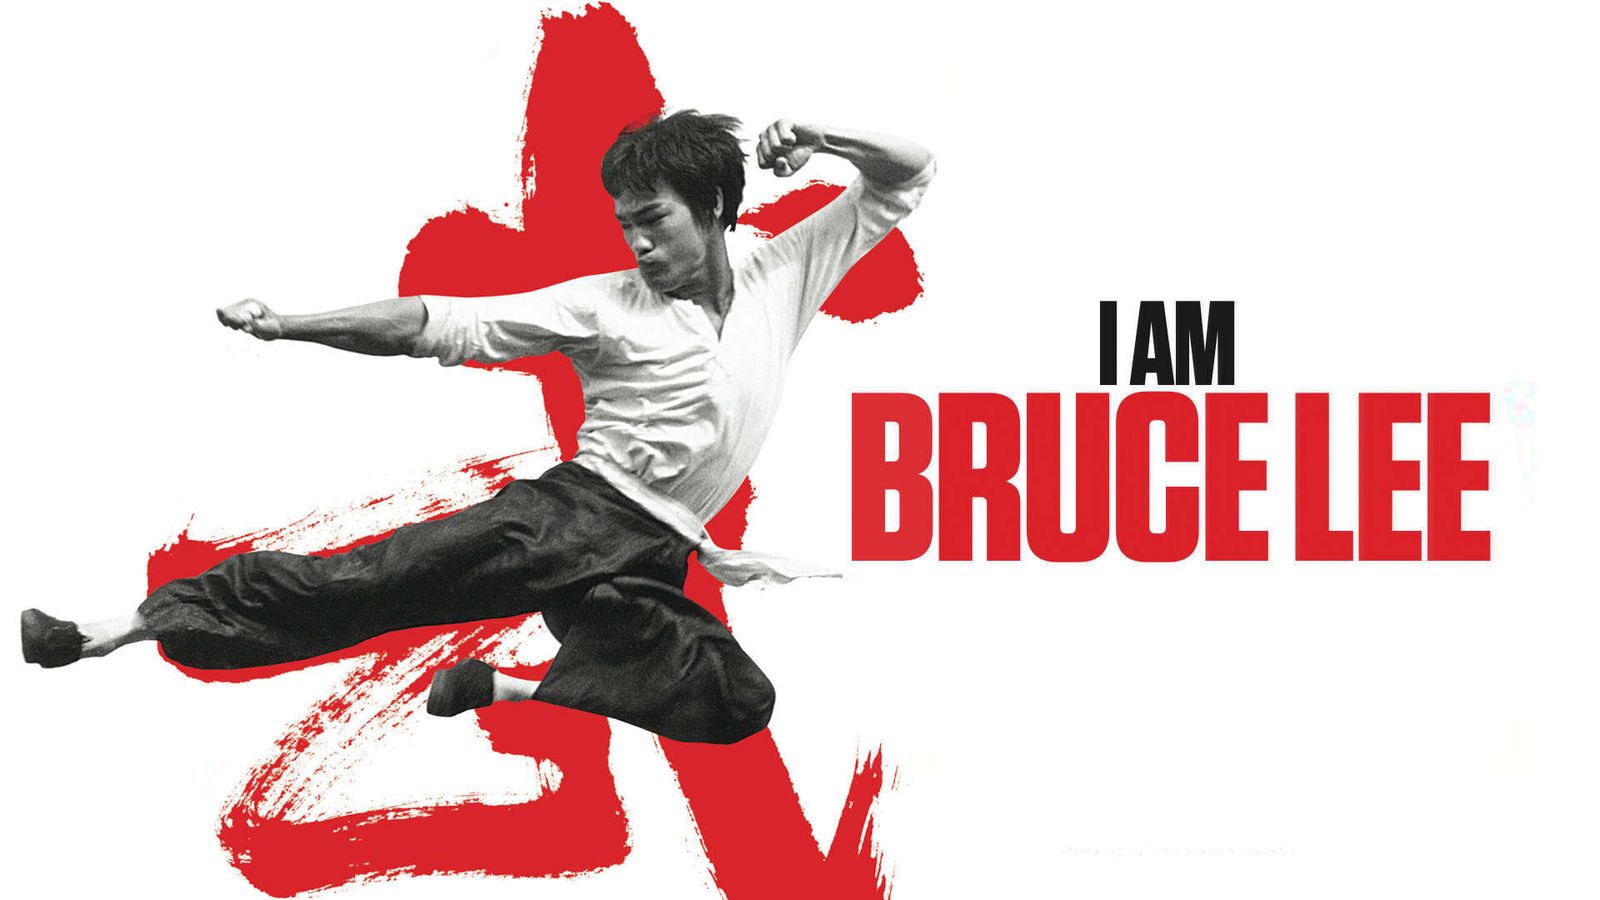 Bruce Lee Full HD Wallpaper Picture Image